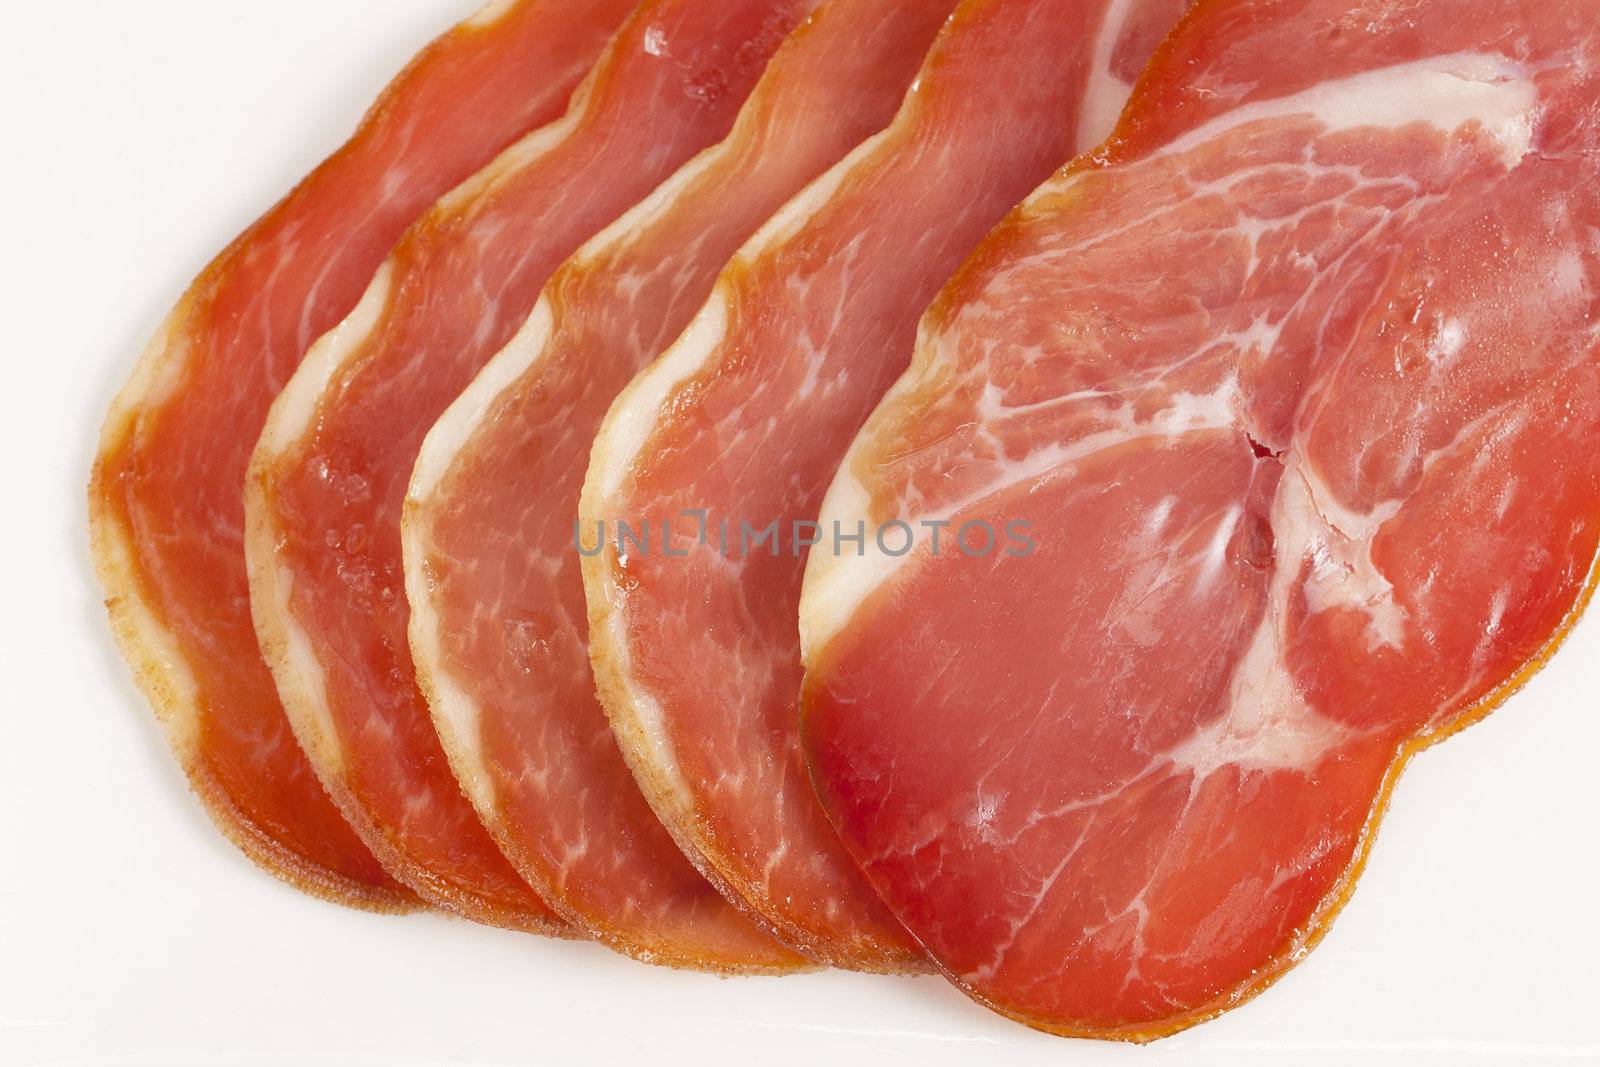 Macro shot in the fresh cut of ham against a white background